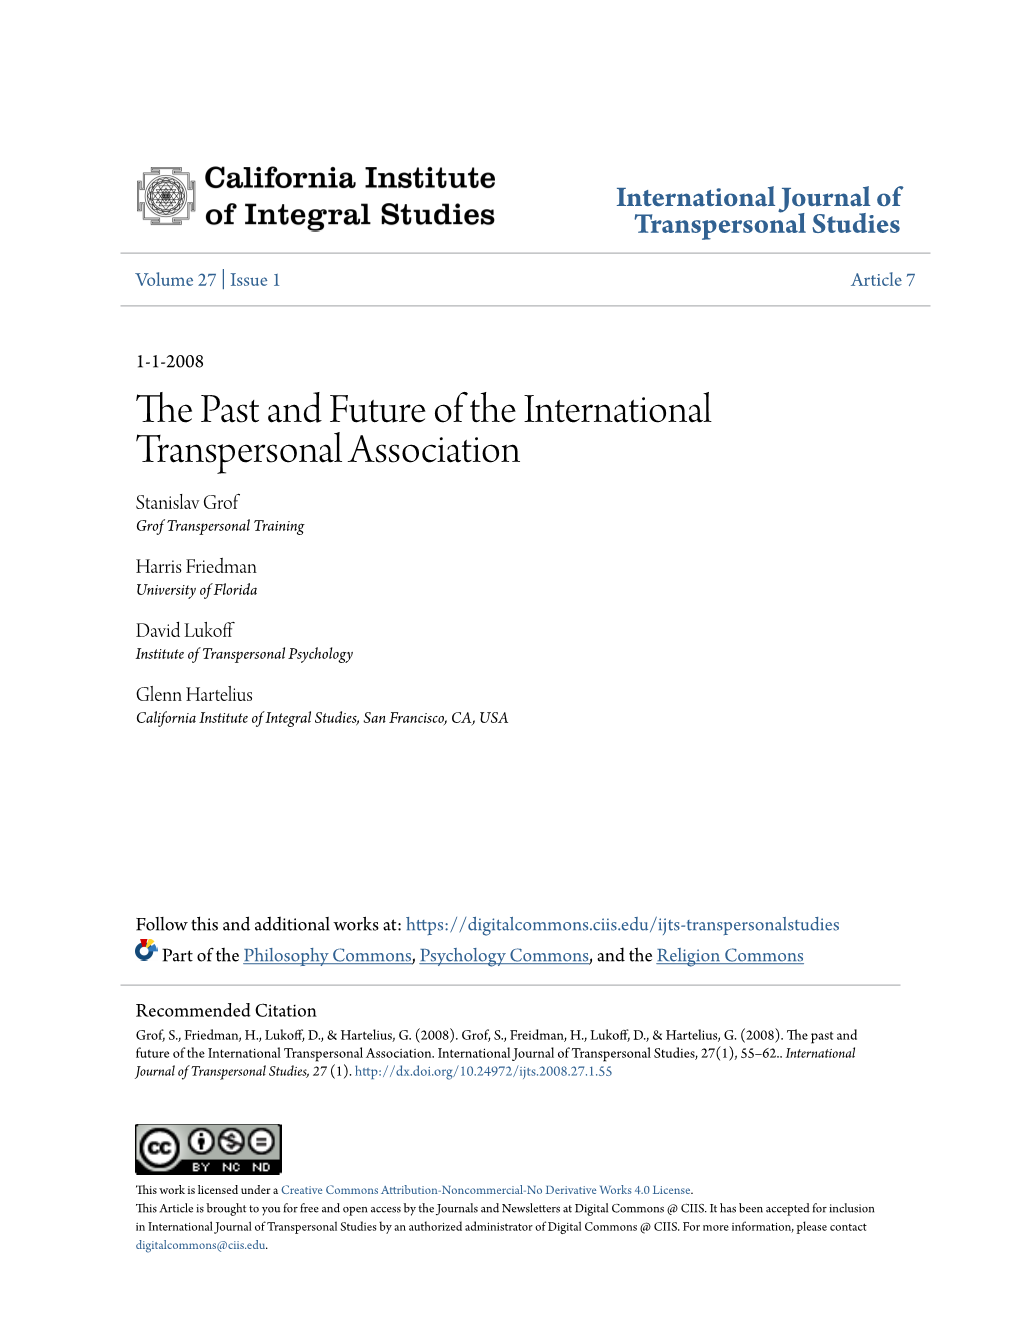 The Past and Future of the International Transpersonal